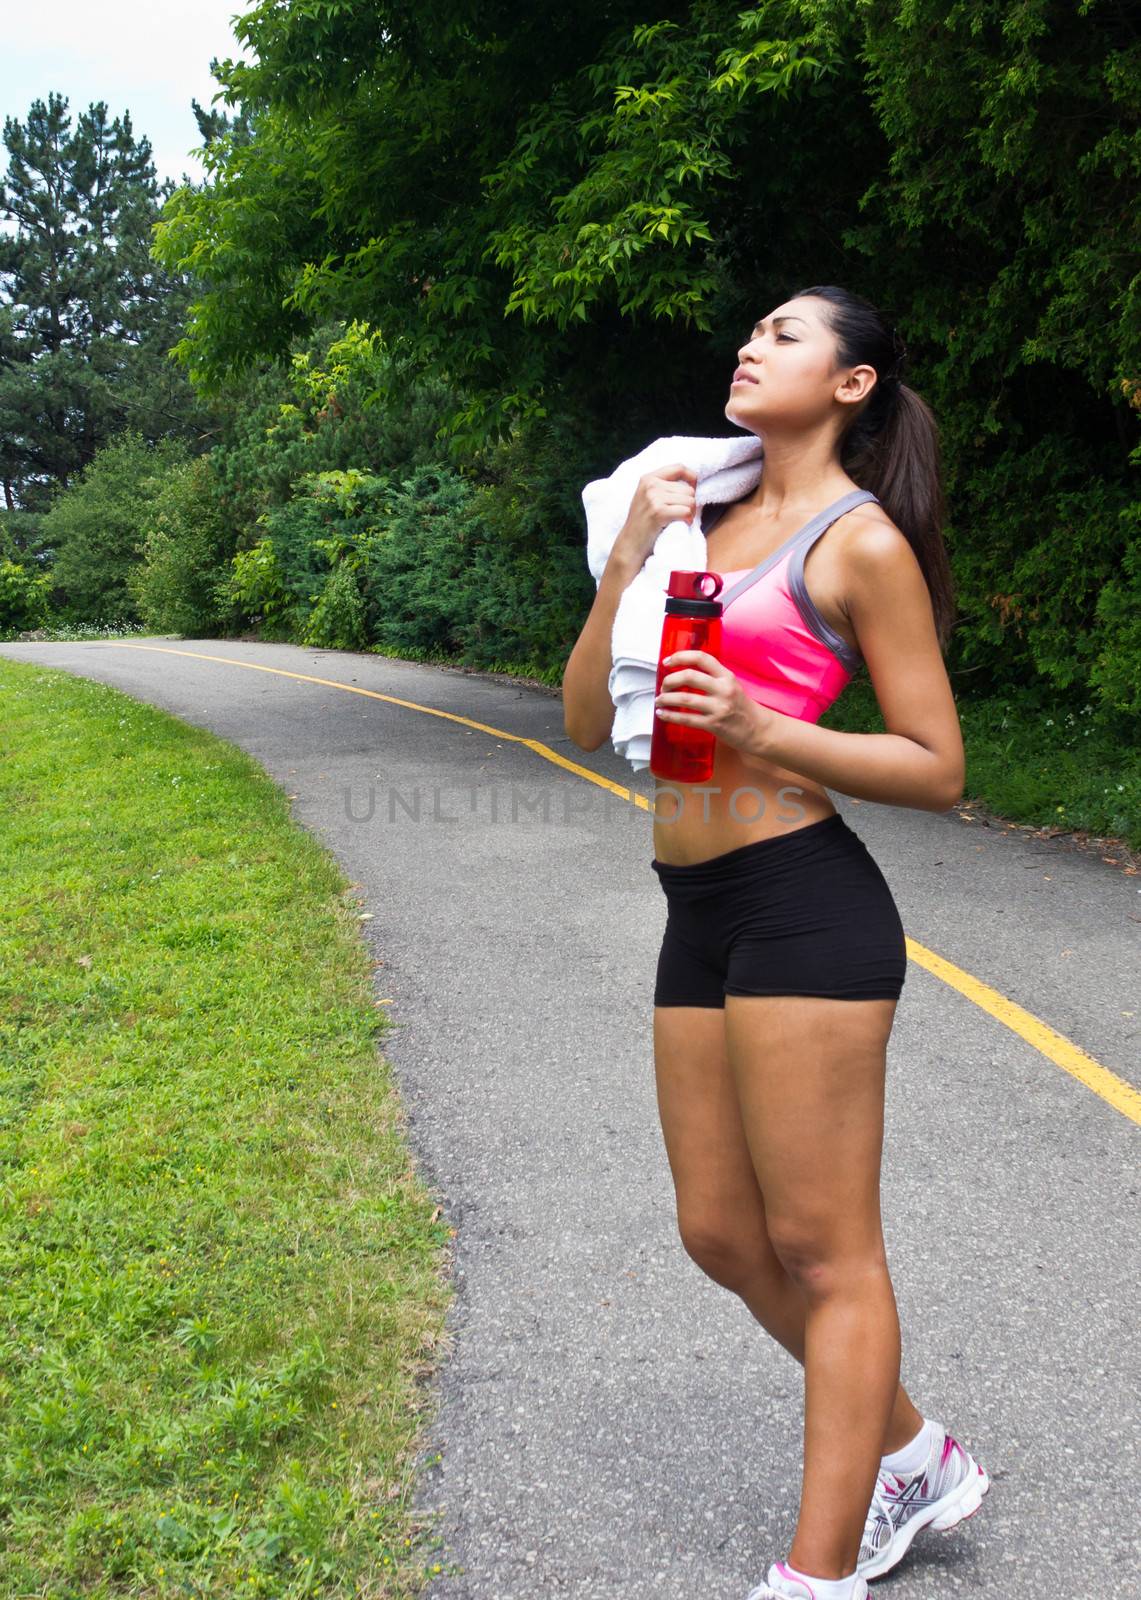 Young woman resting with towel and water bottle after running